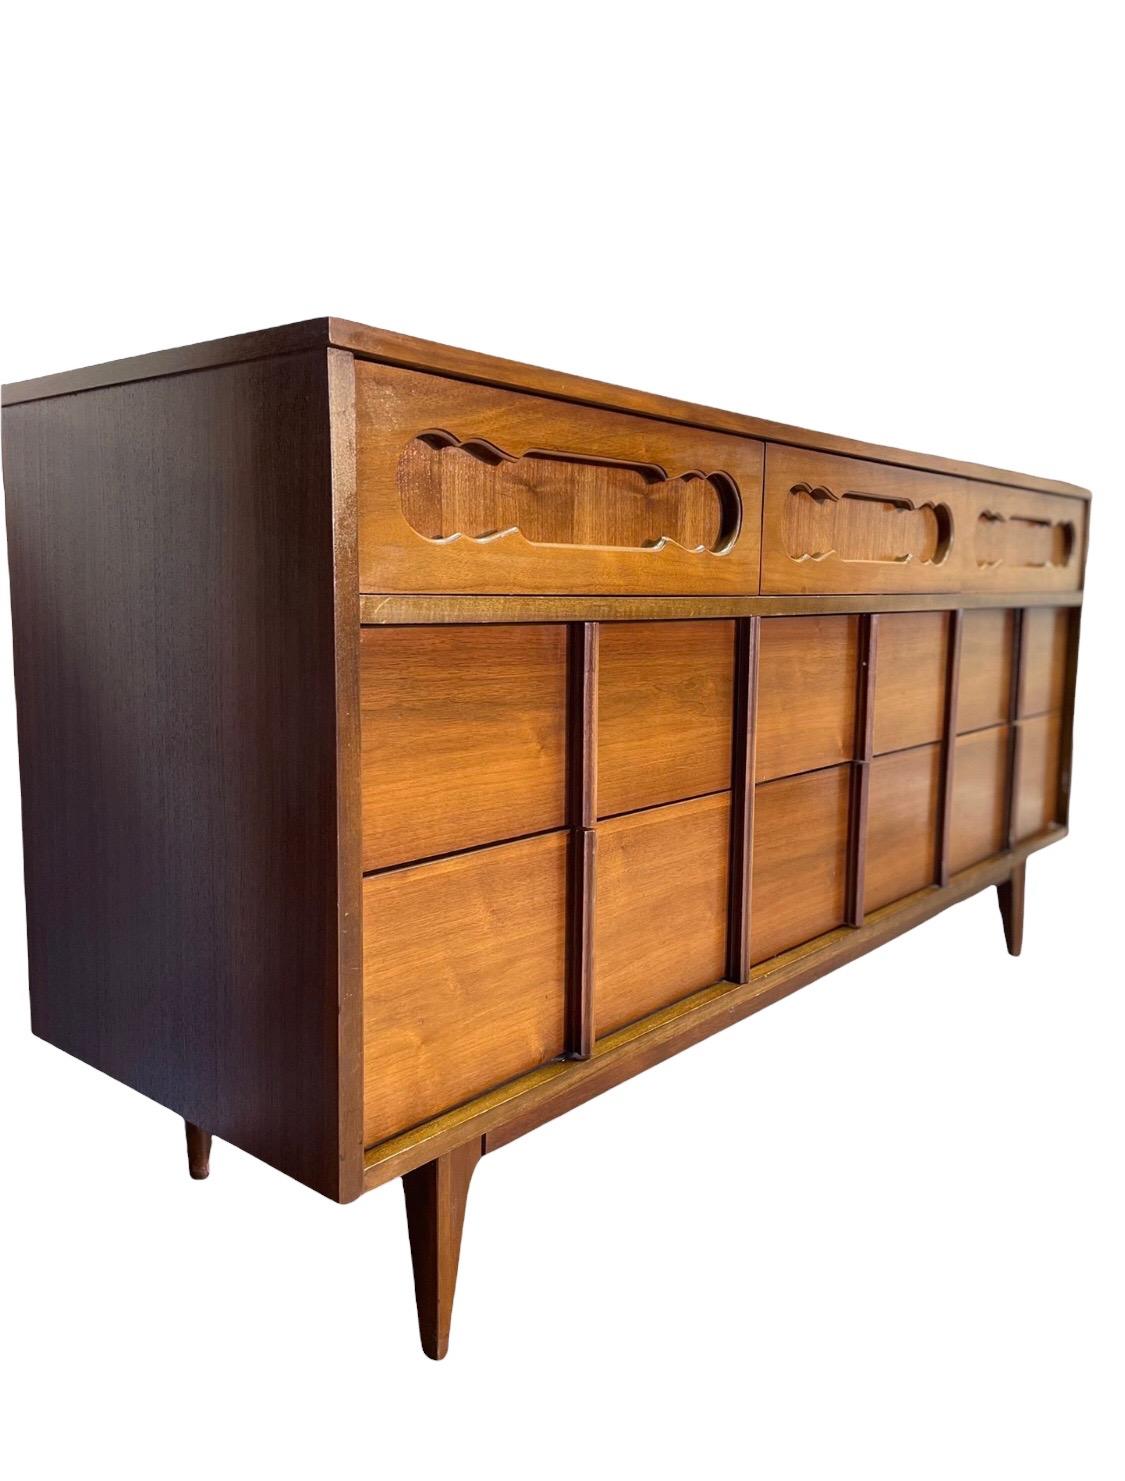 An elegant Mid-Century Modern nine drawer dresser. The dresser features gorgeous walnut wood grain and sleek mid-century design. It offers ample room for storage, with nine dovetailed drawers and original.

Dimensions: 62 W 18 D 43 H.

      